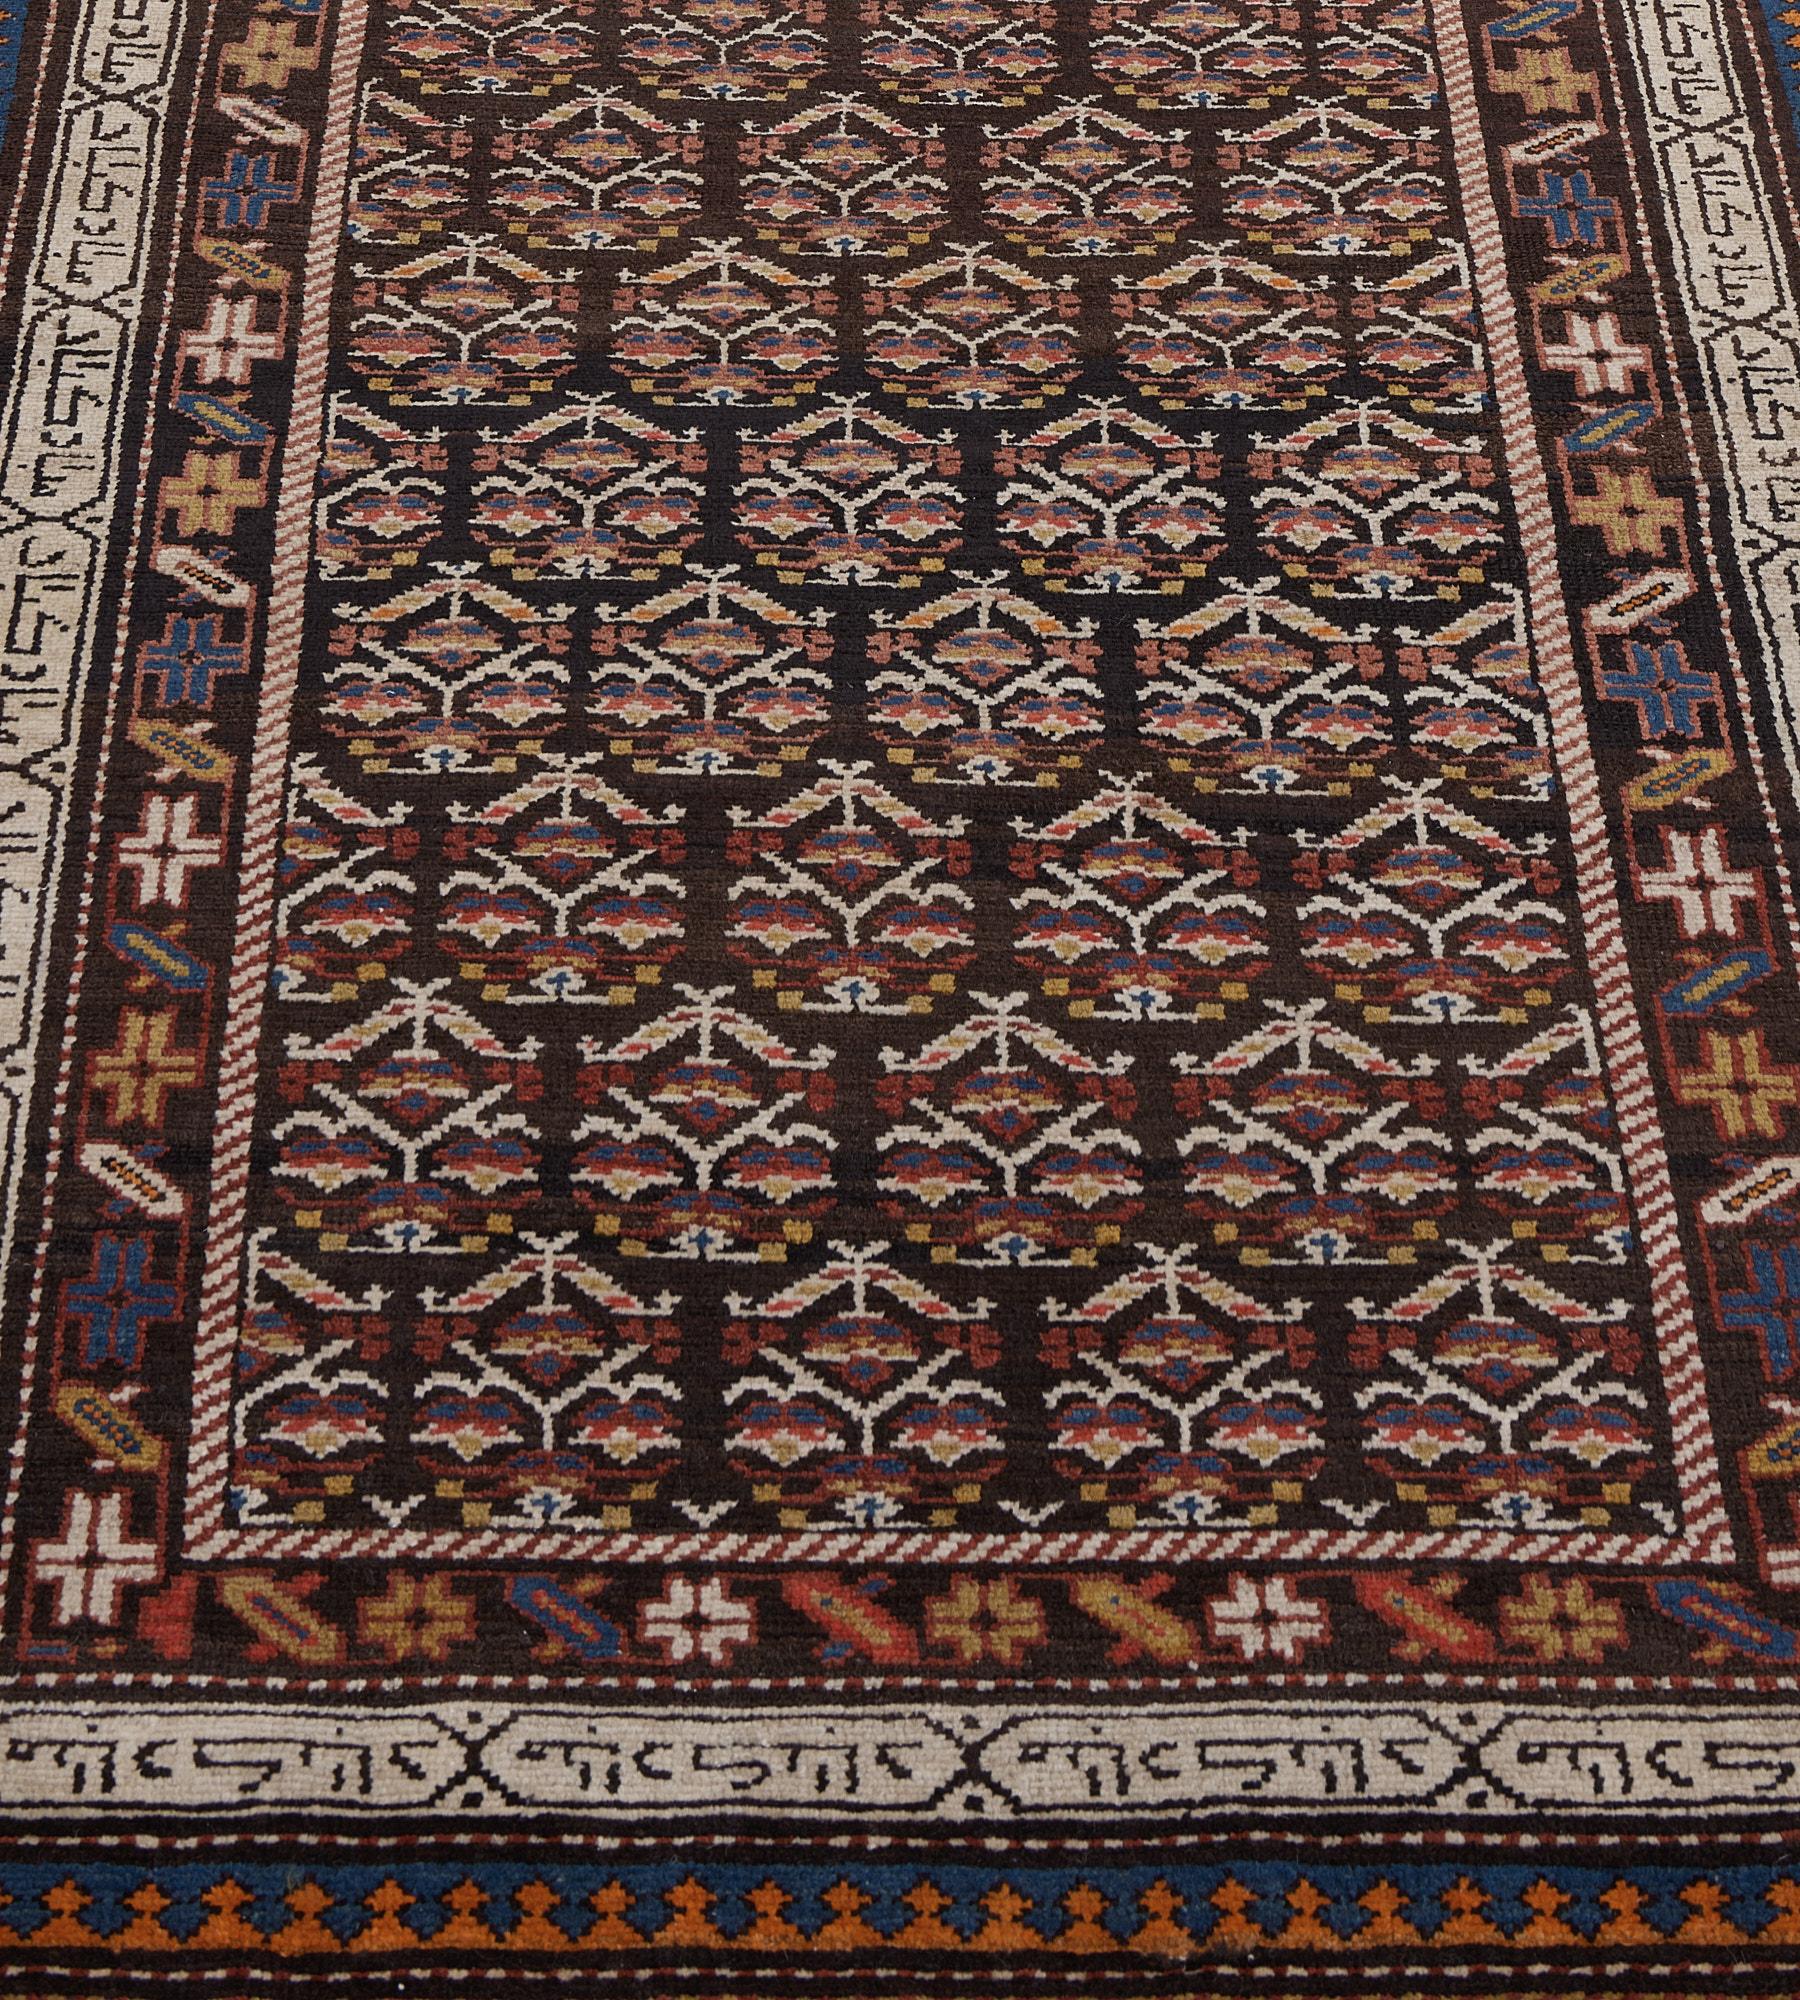 This antique, circa 1920, Persian Serab runner has a chocolate-brown field with diagonal rows of polychrome angular floral motifs enclosed within a narrow fox-brown and ivory barber-pole stripe, in a chocolate-brown border of angular polychrome